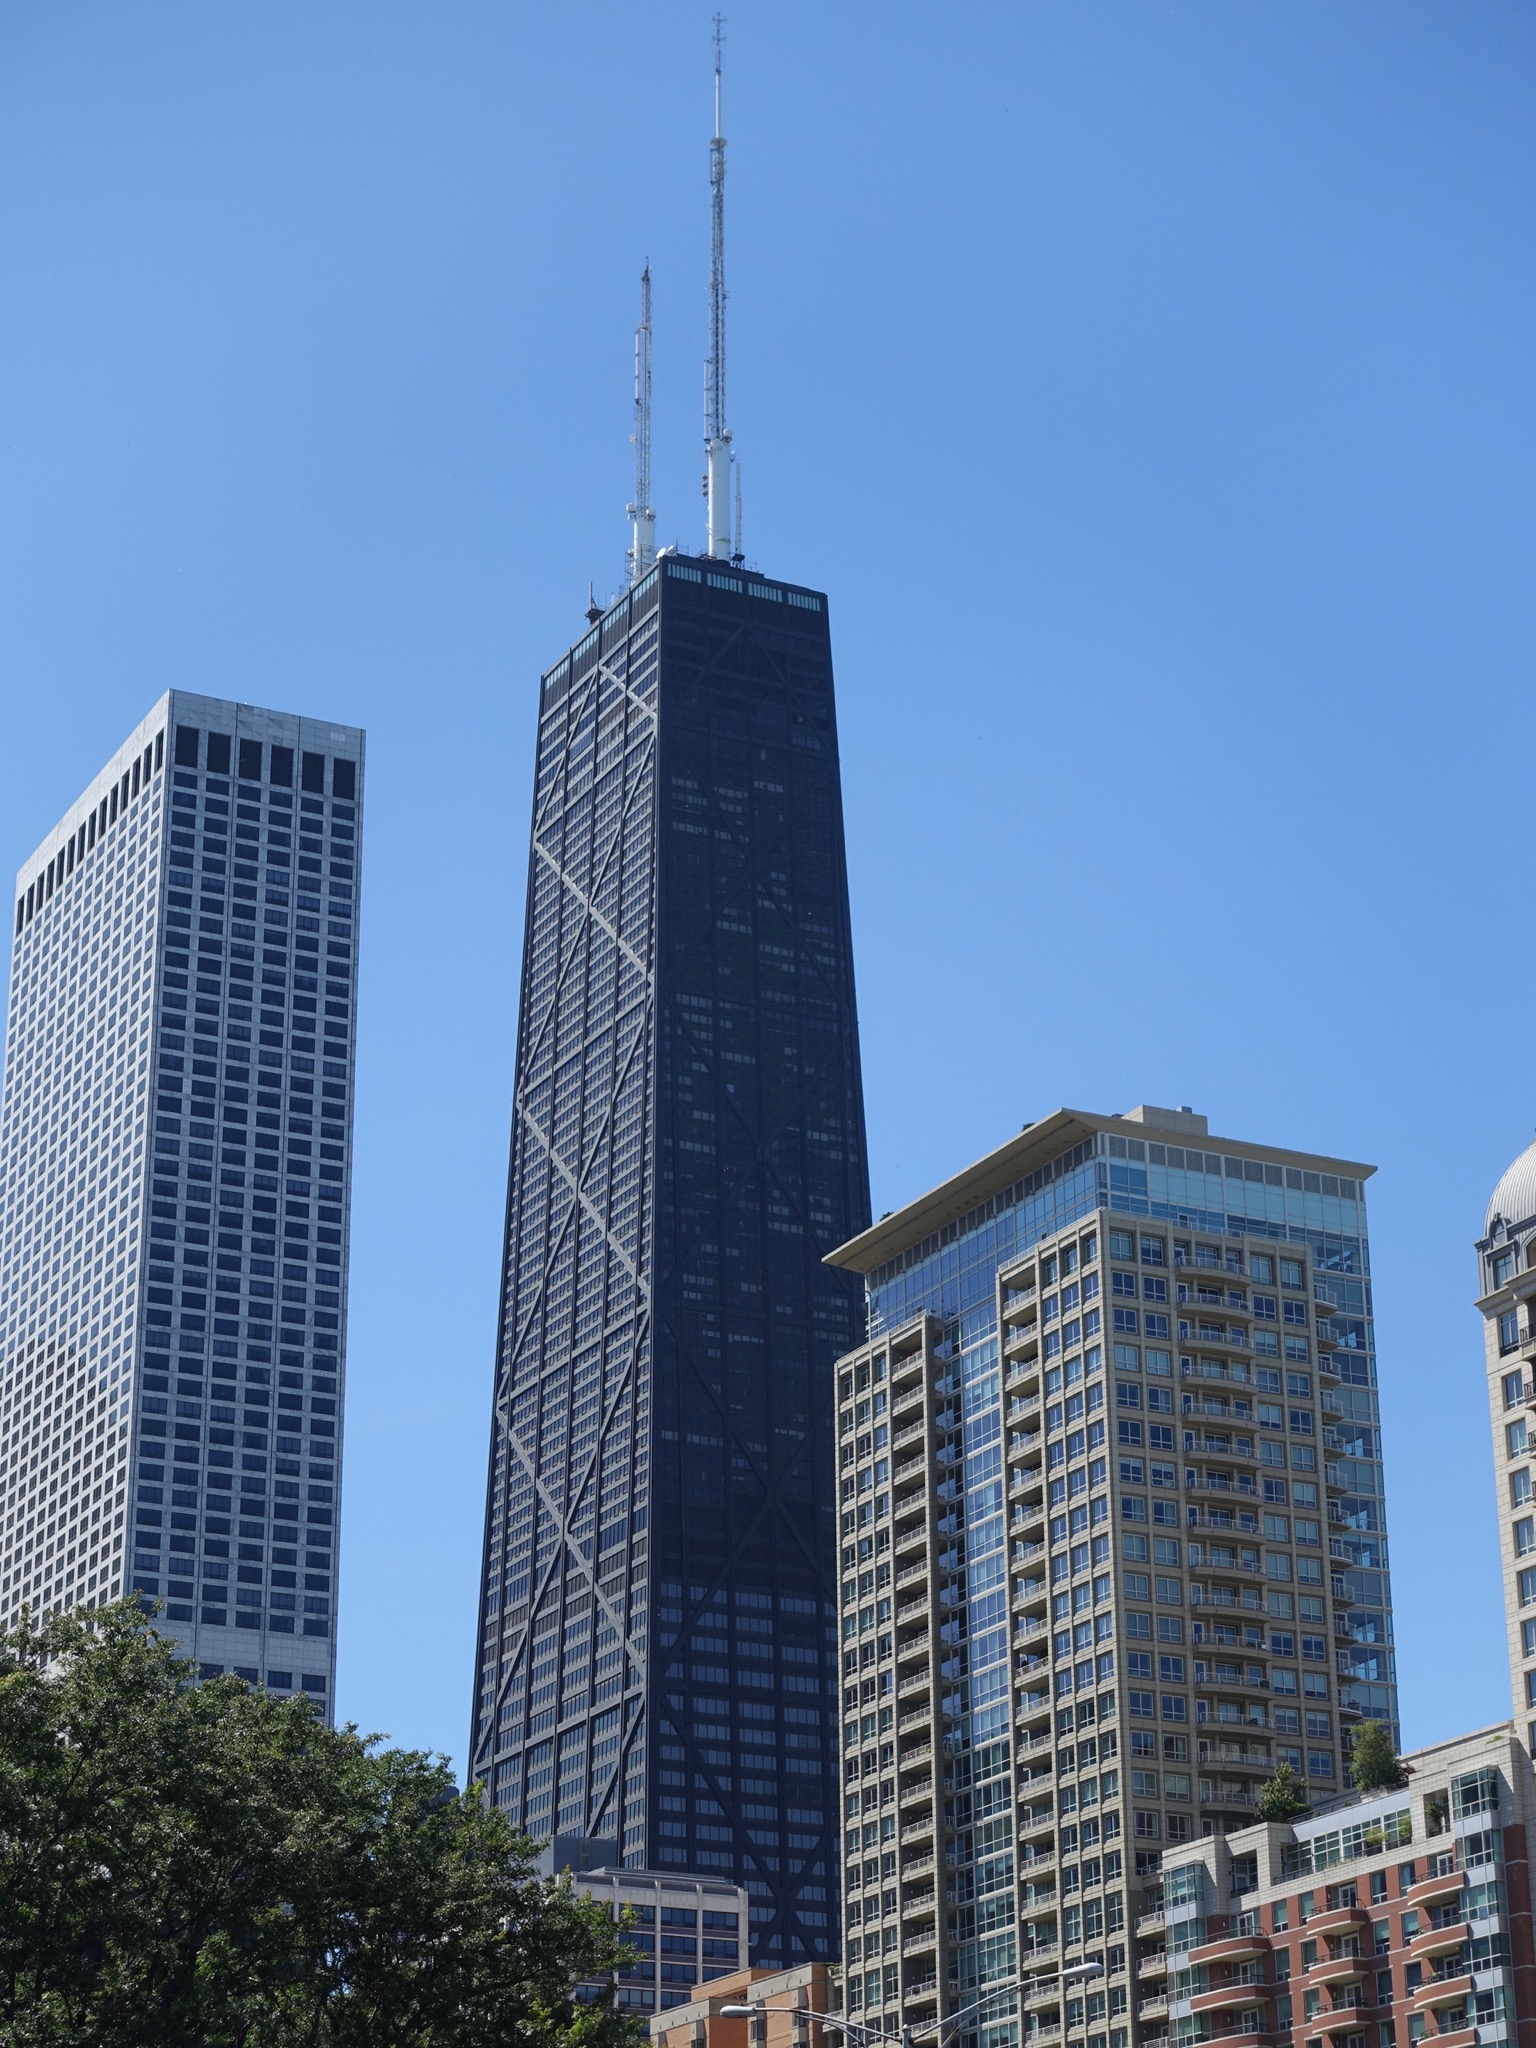 Photo 103 of 135 from the album Highlights Chicago 2015.